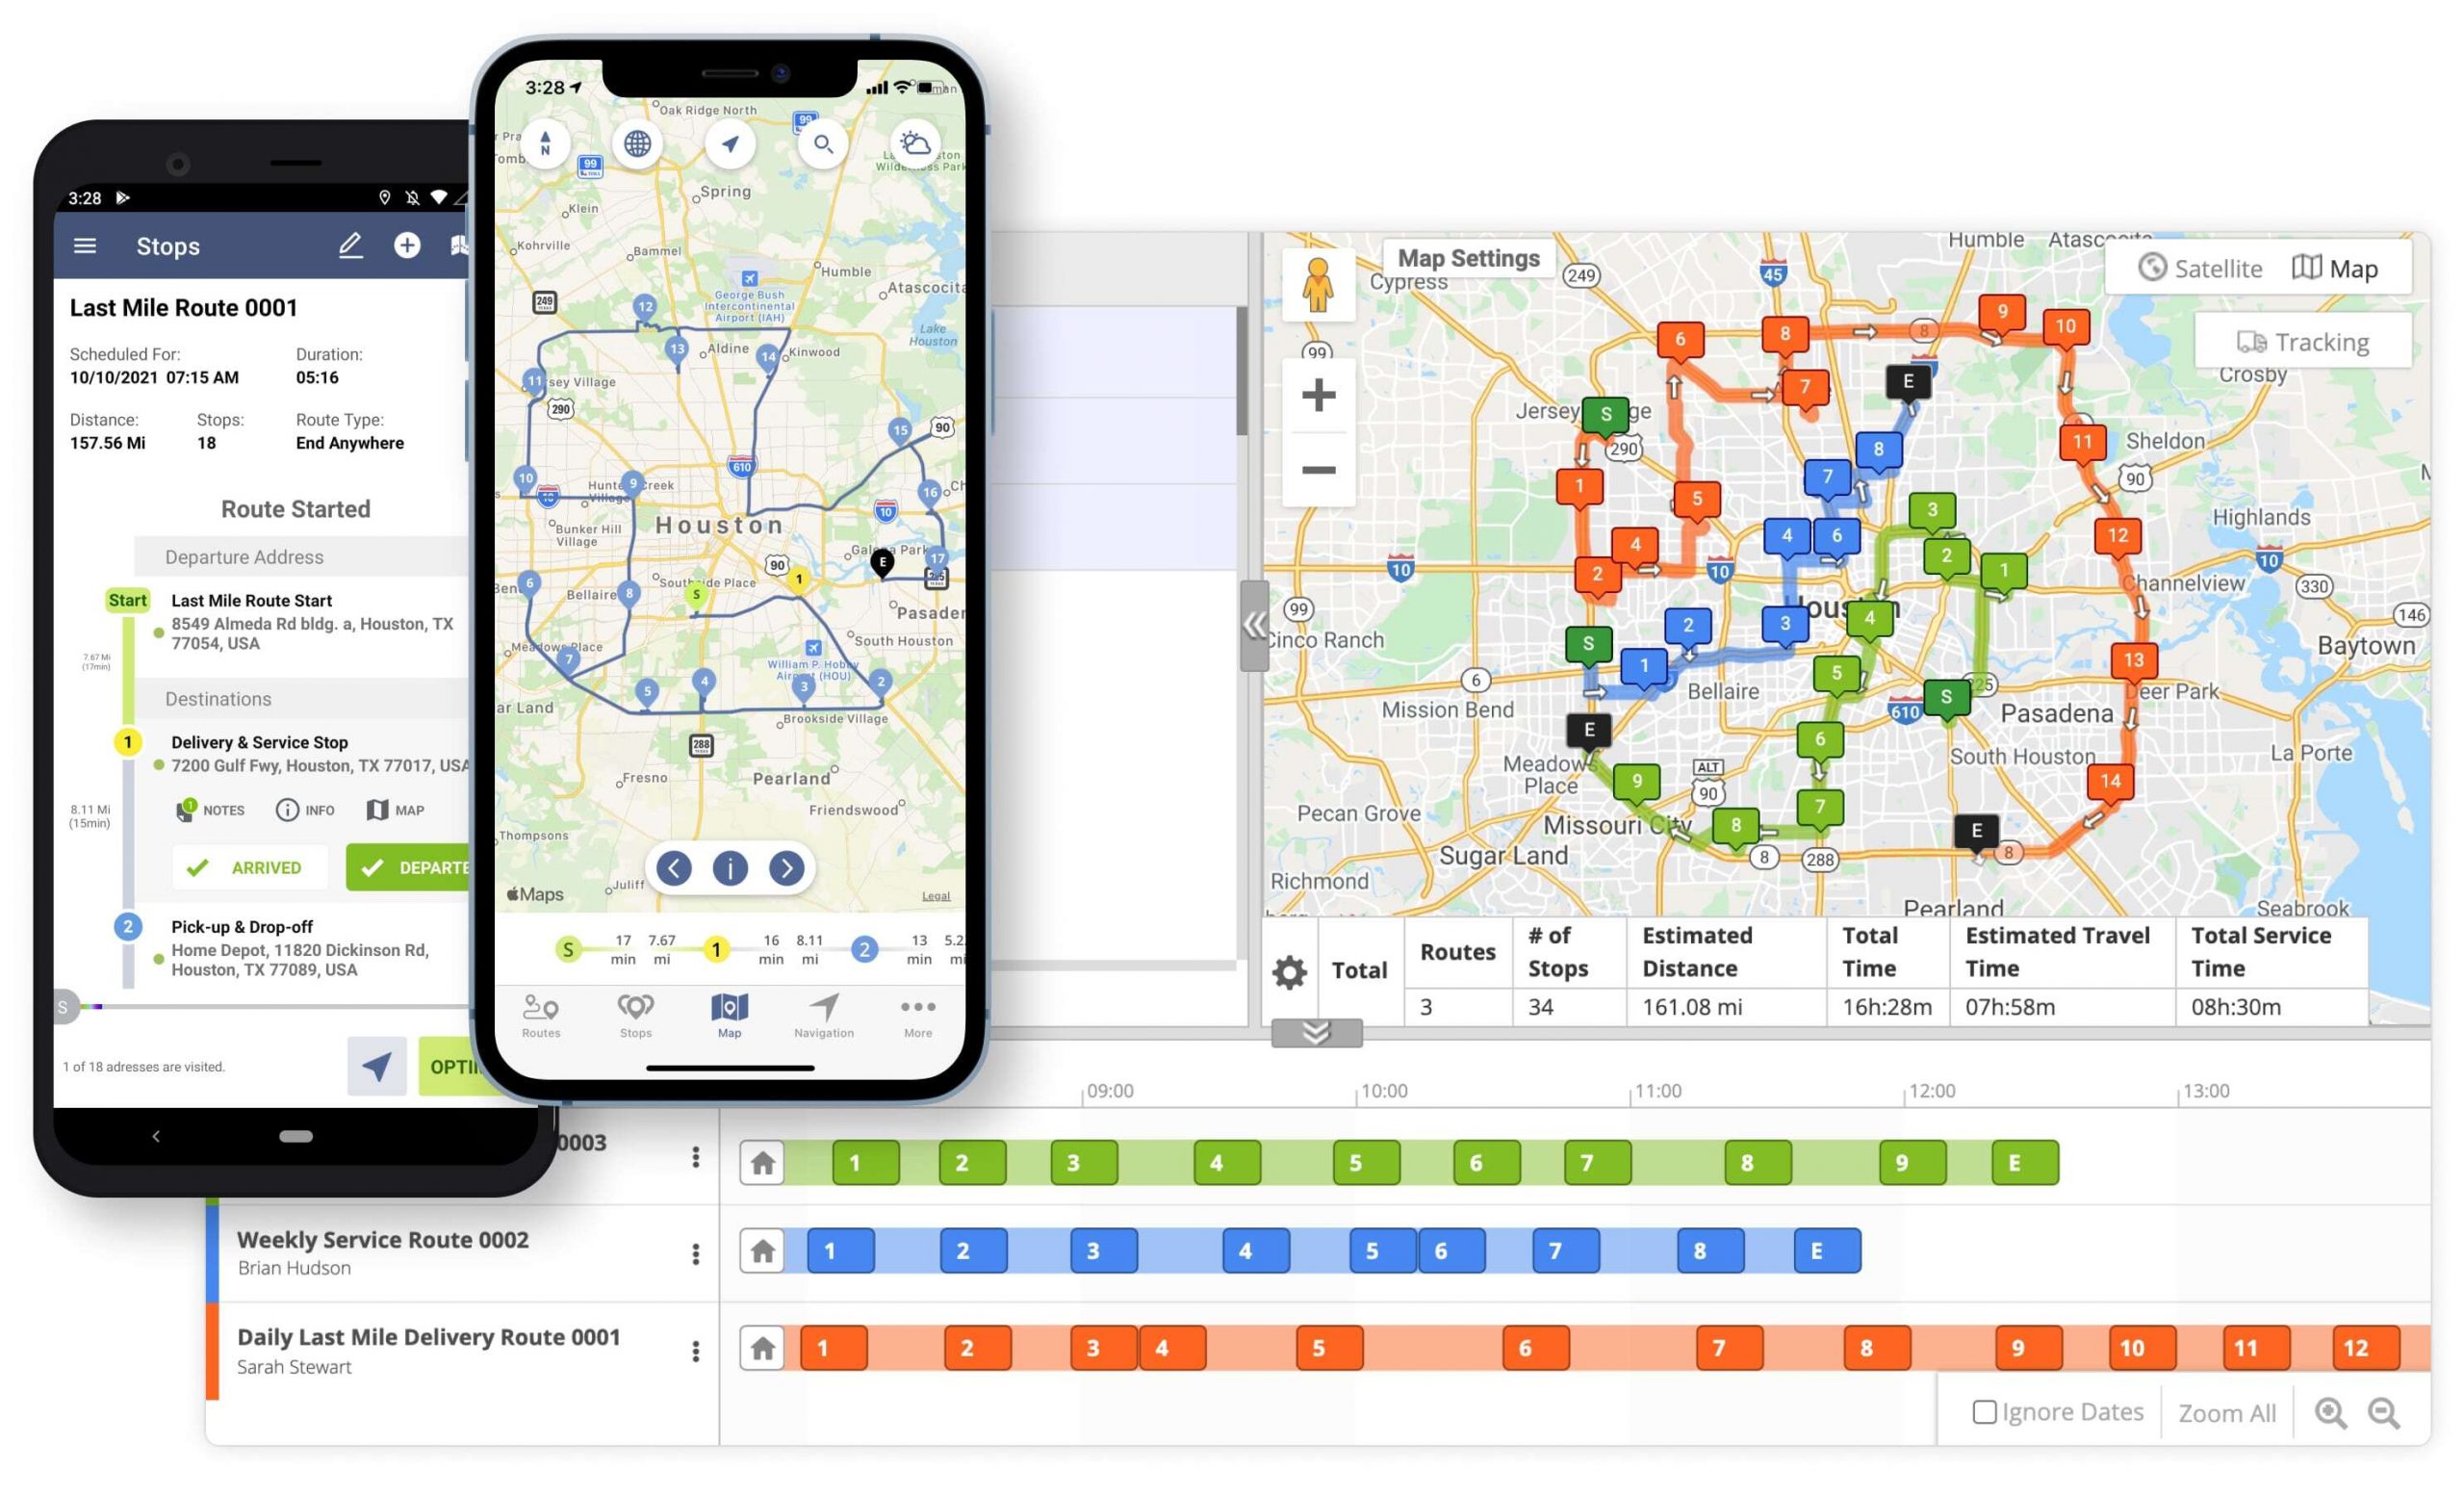 Dynamic route planning and dispatching from Route4Me's web platform to drivers' route planner apps.